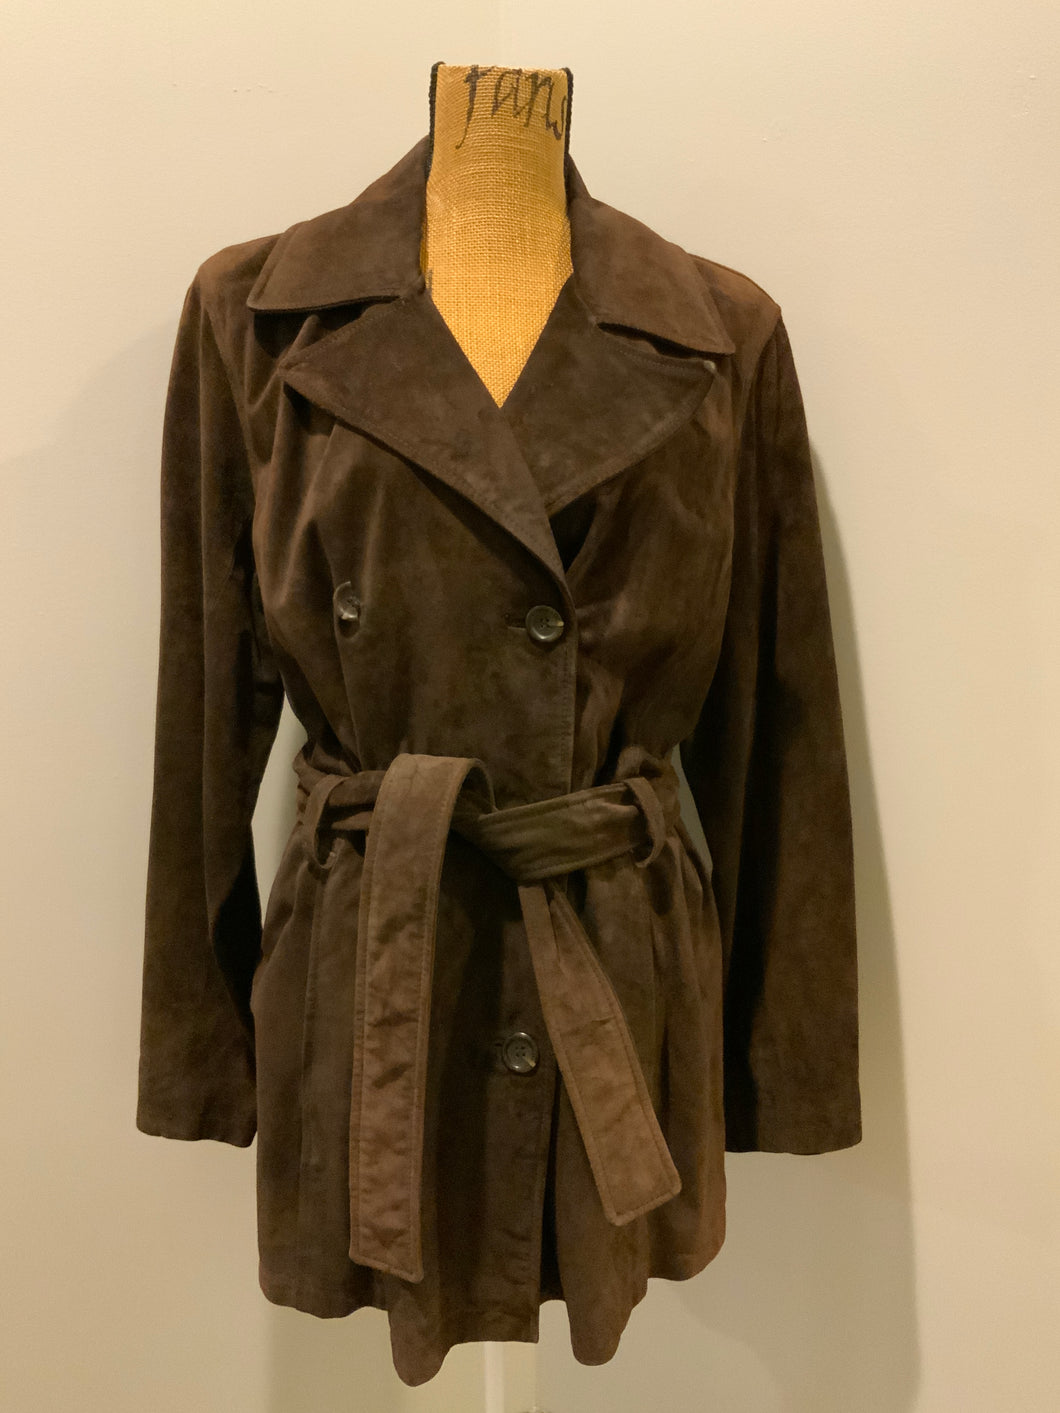 Kingspier Vintage - Andrew Marc dark brown suede double breasted trench coat with belt and welt pockets. Fits a size large.